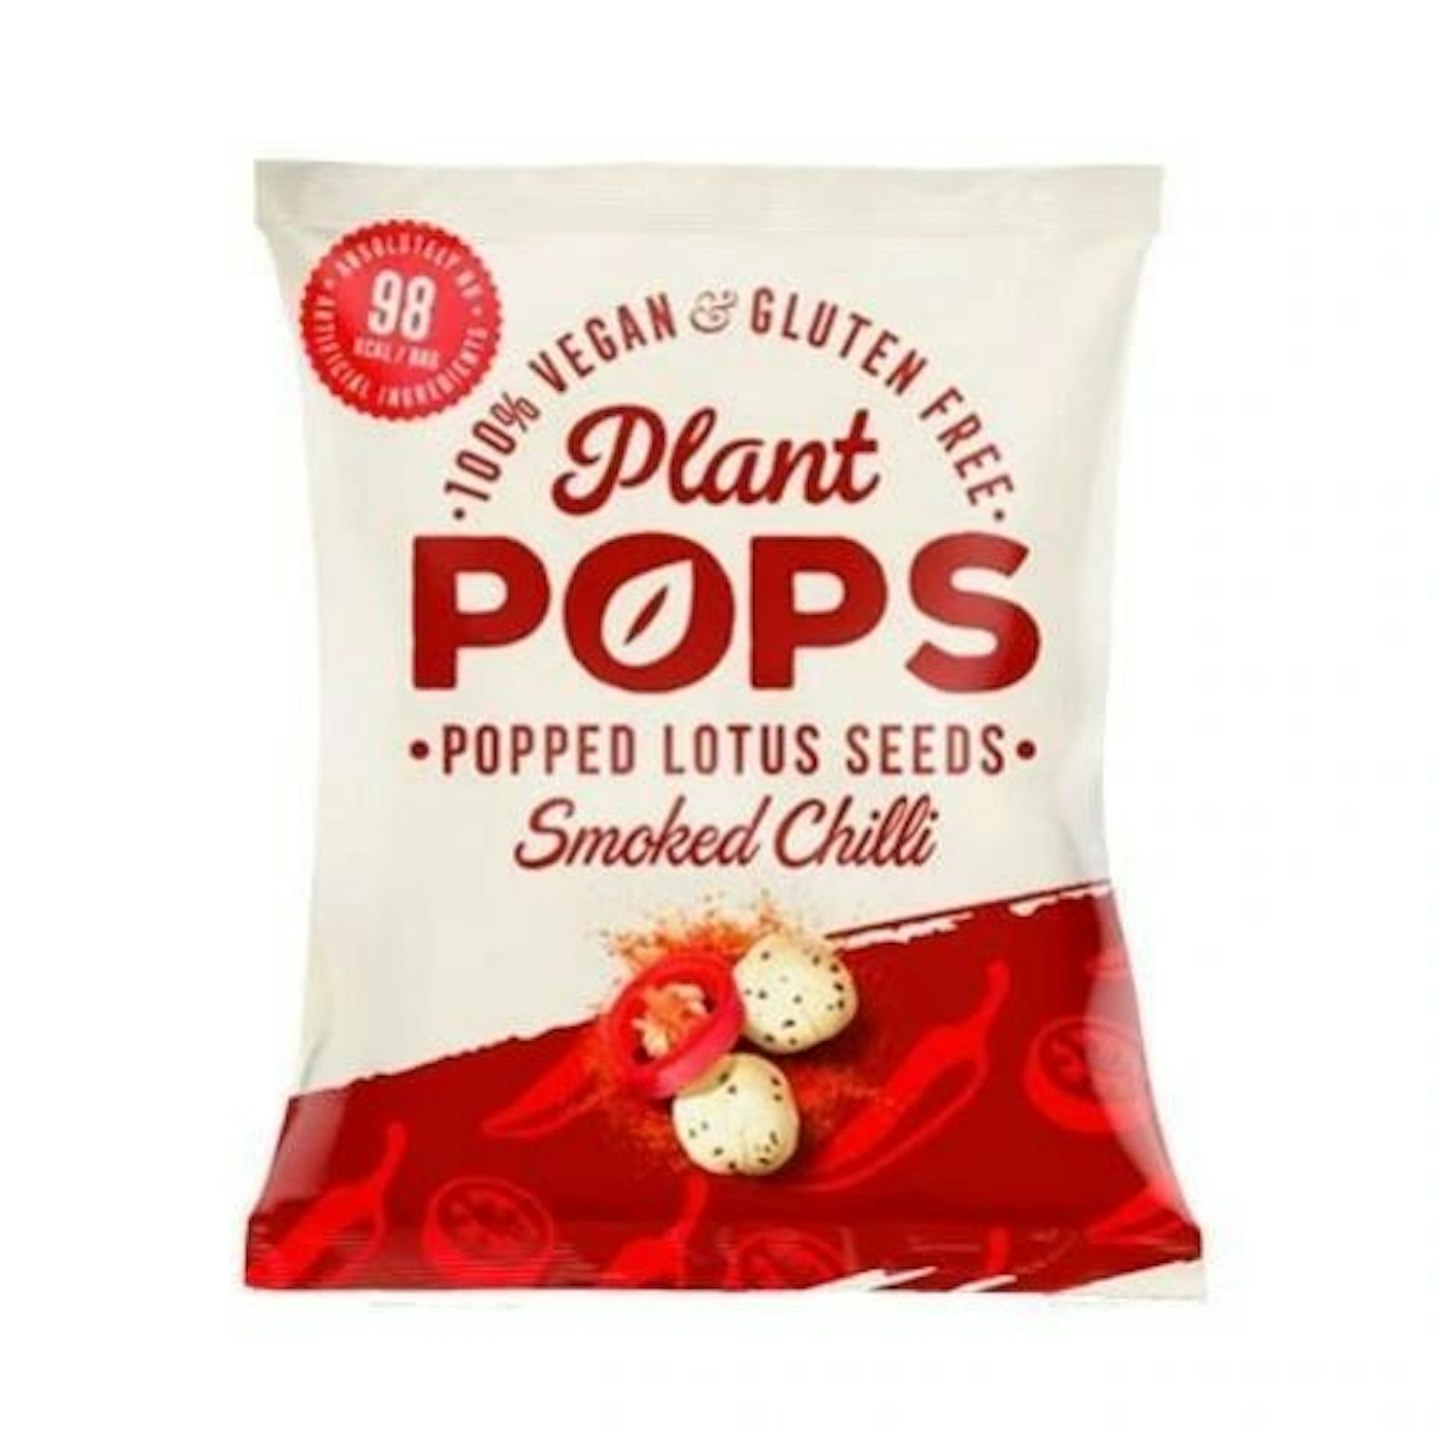 Plant Pops - Popped Lotus Seeds - Smoked Chilli (20g)